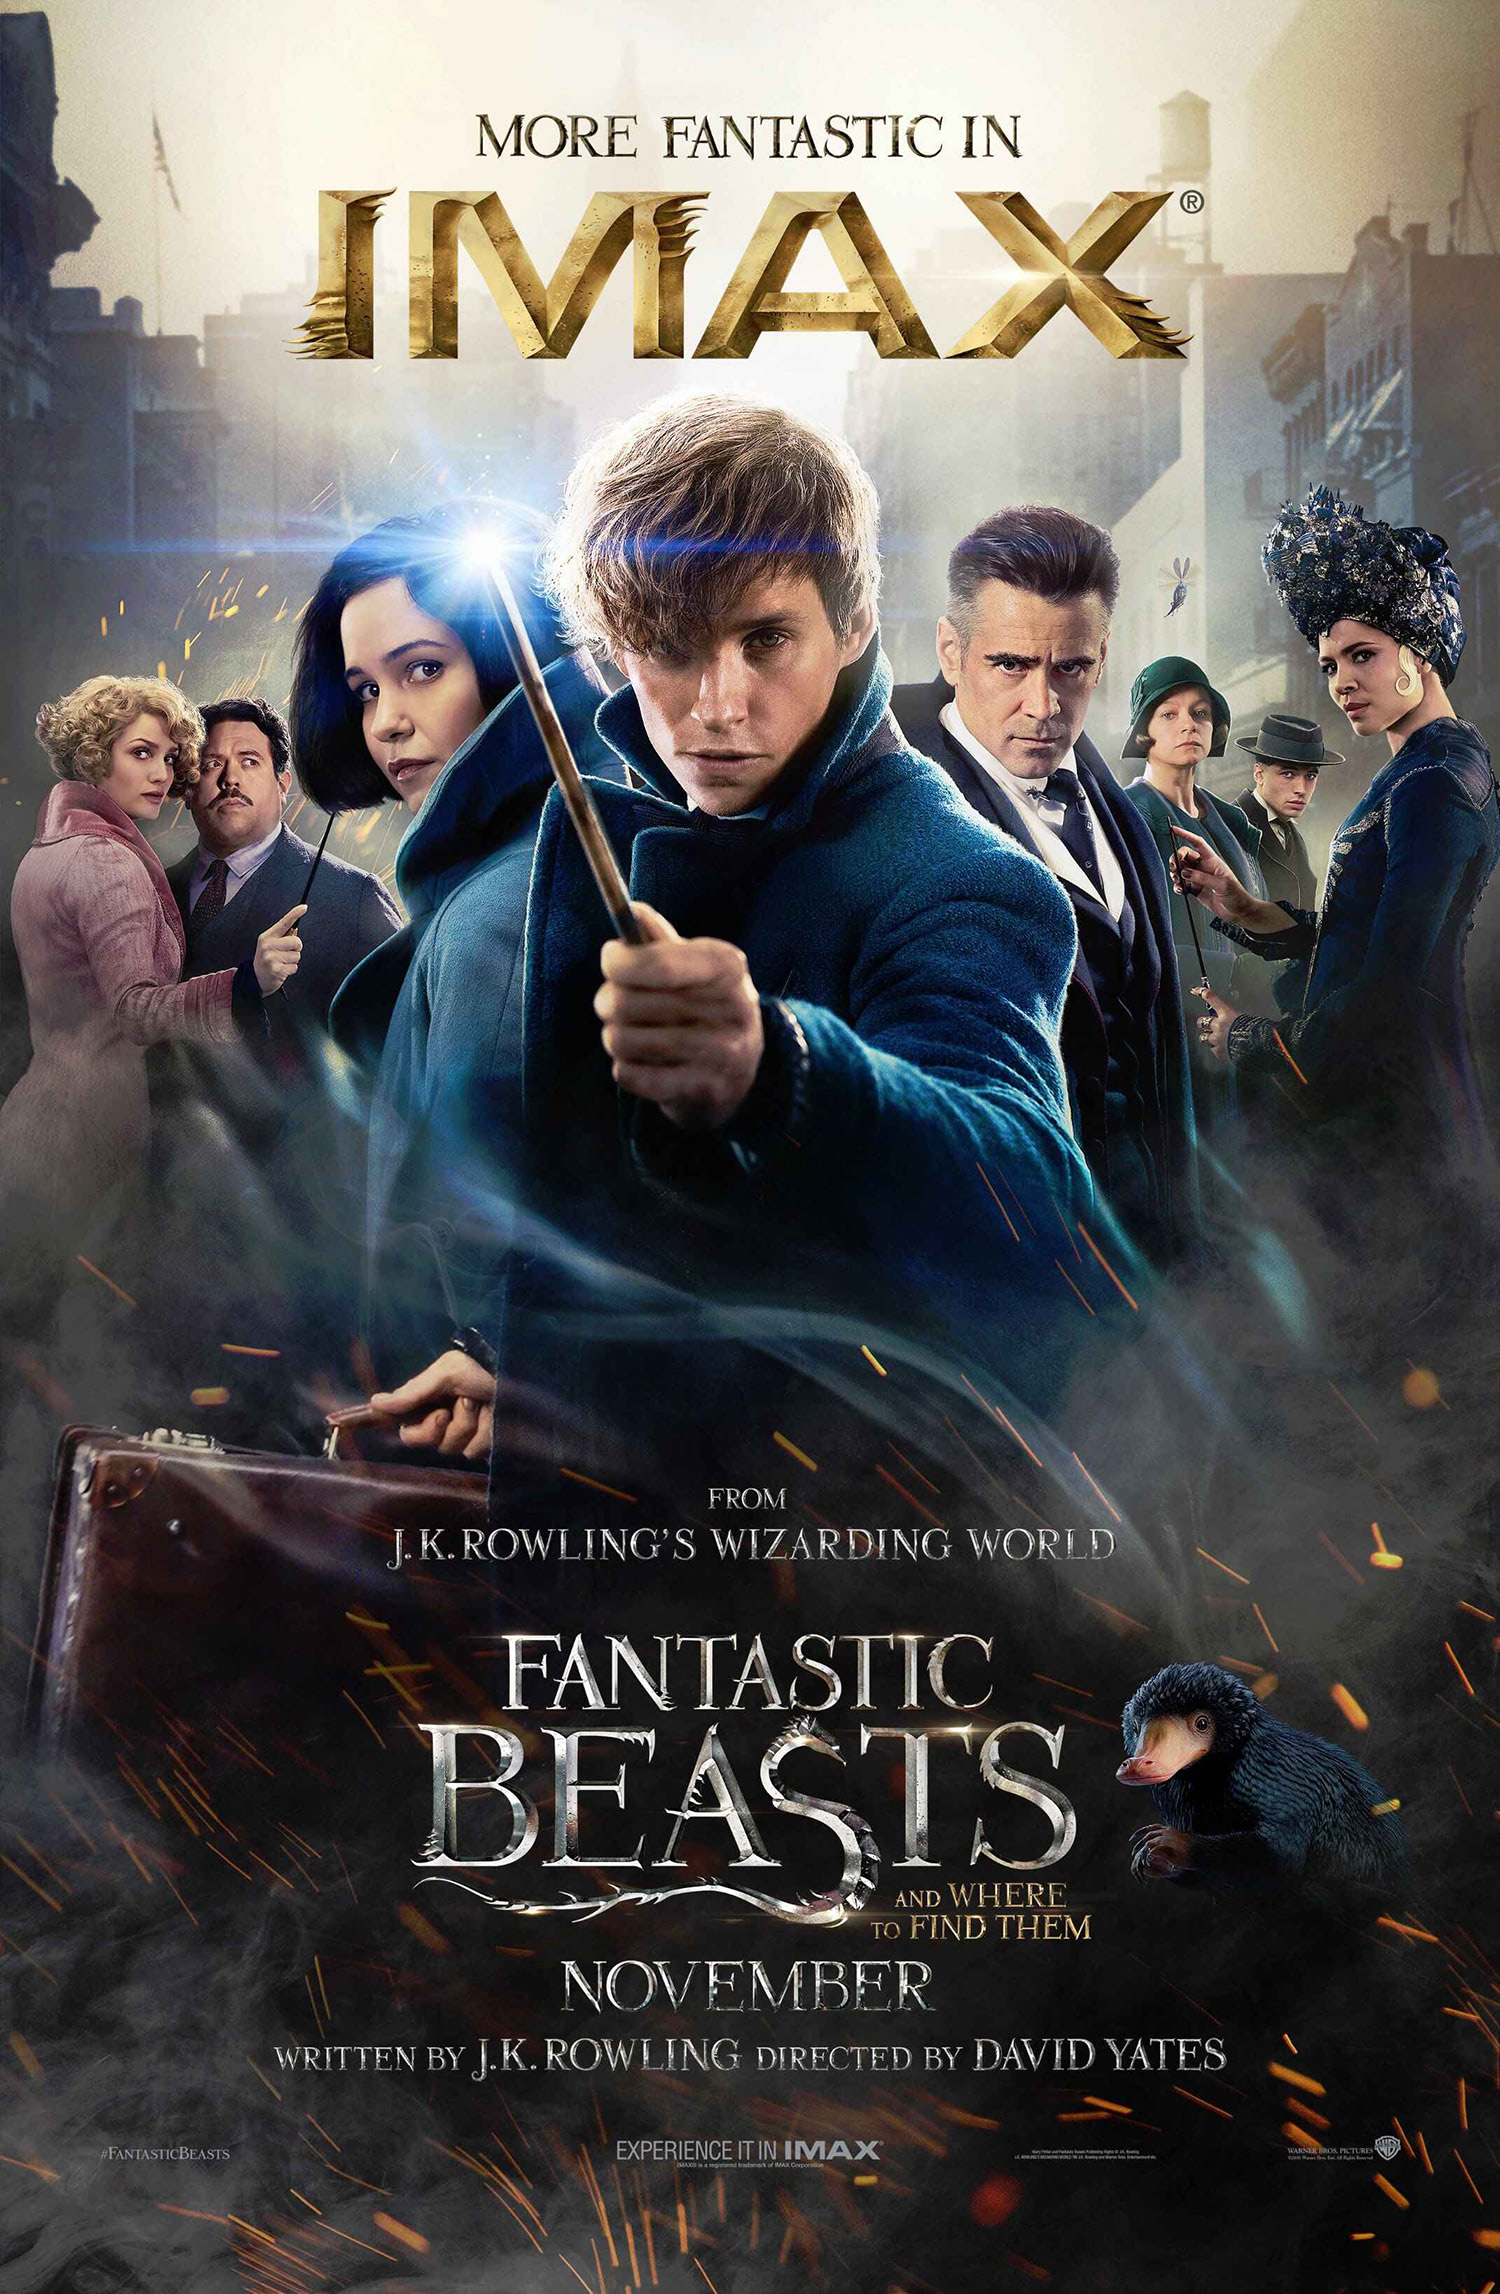 ‘Fantastic Beasts and Where to Find Them’ IMAX poster